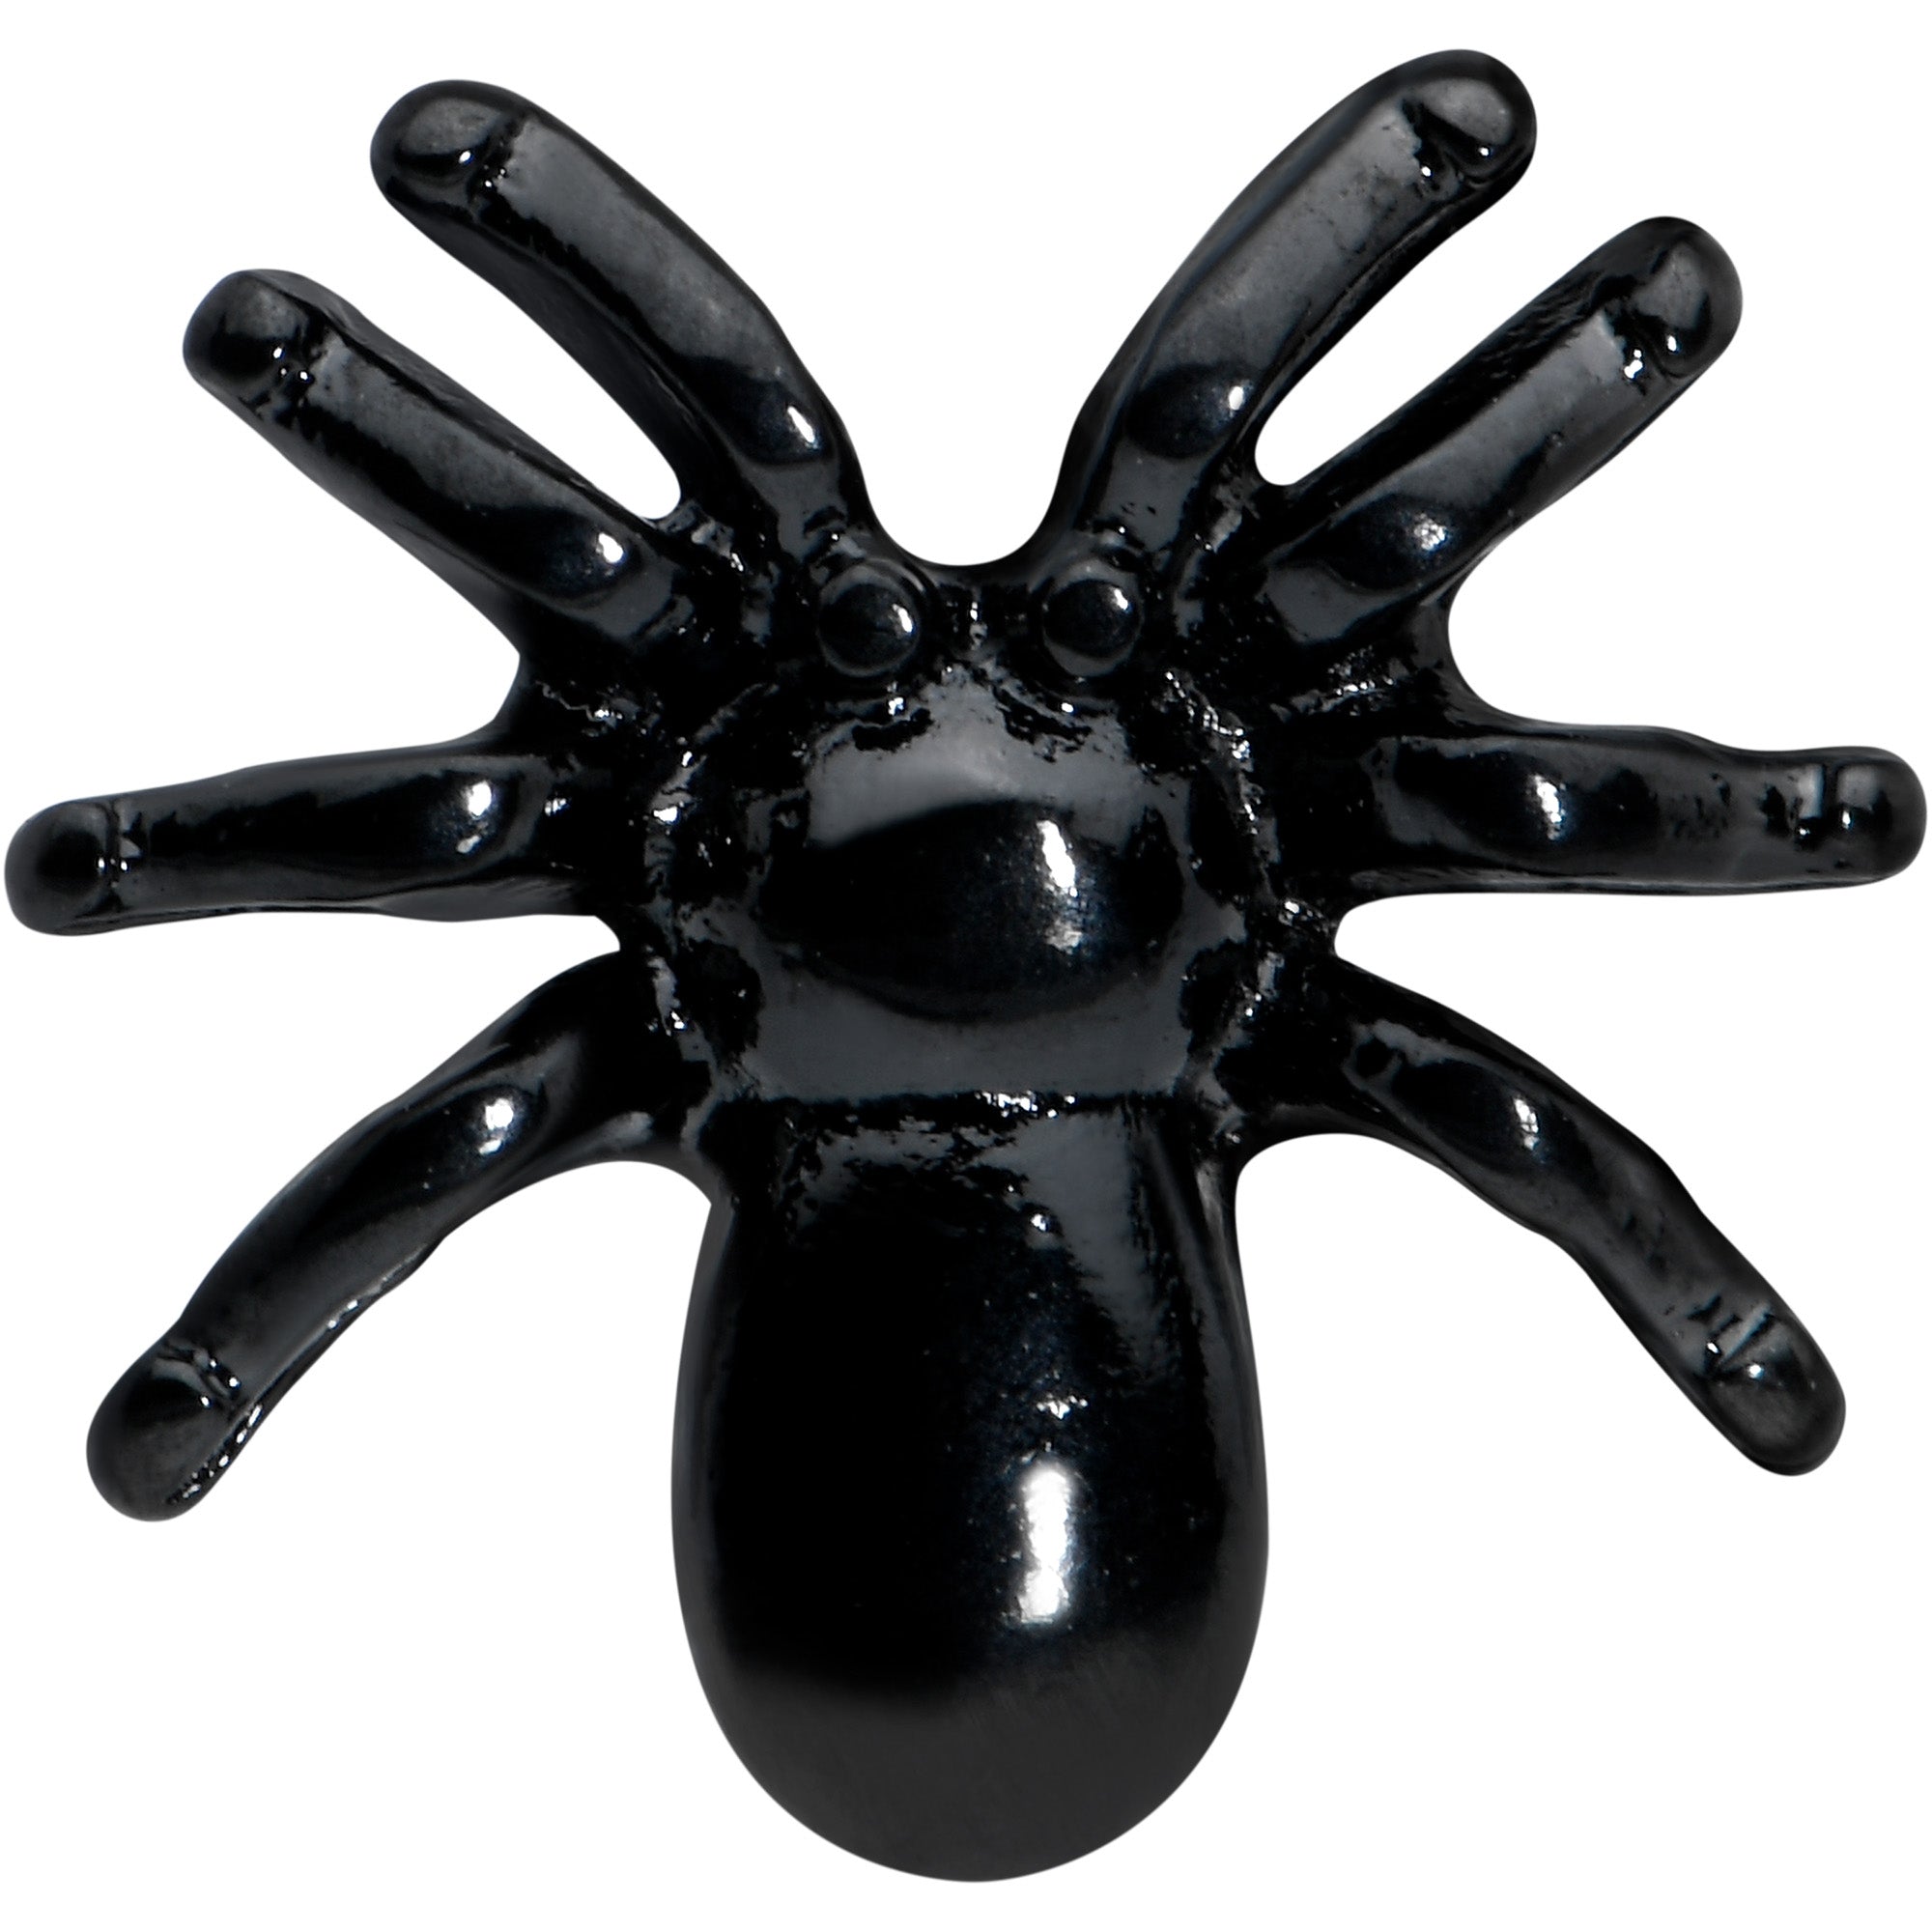 Black Titanium Anodized 3-D Spider Barbell Tongue Ring